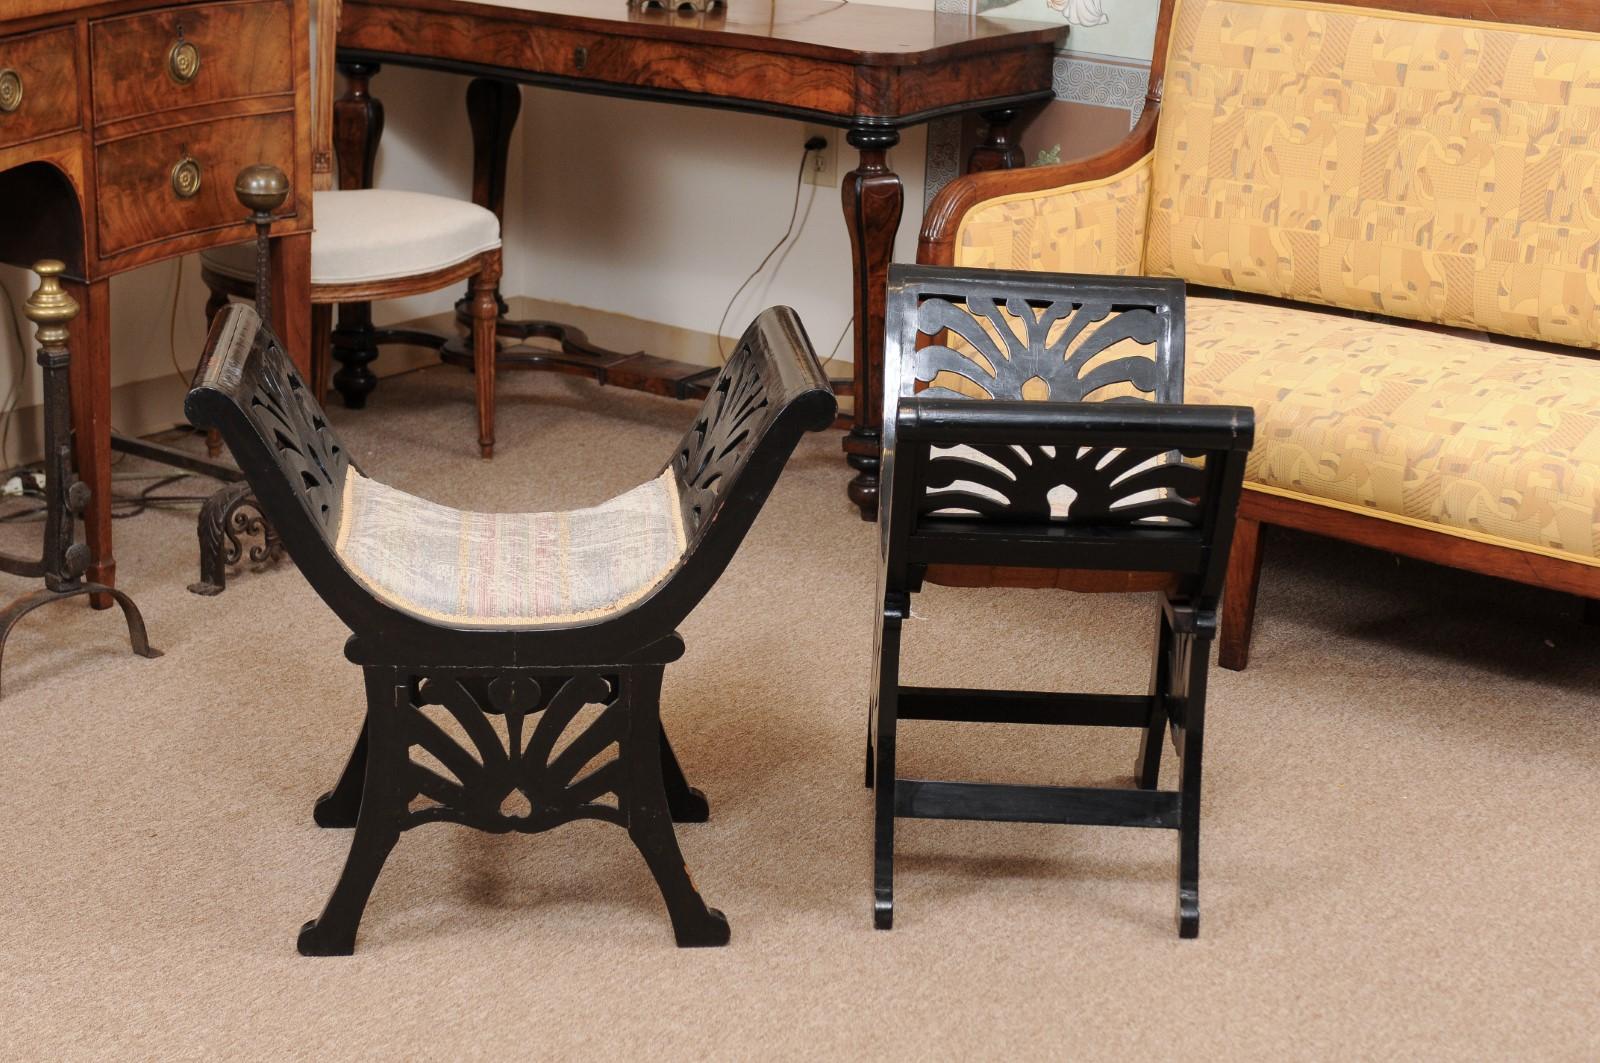 Upholstery Pair of Italian Black Painted Saddle Seat Window Benches, Early 20th Century